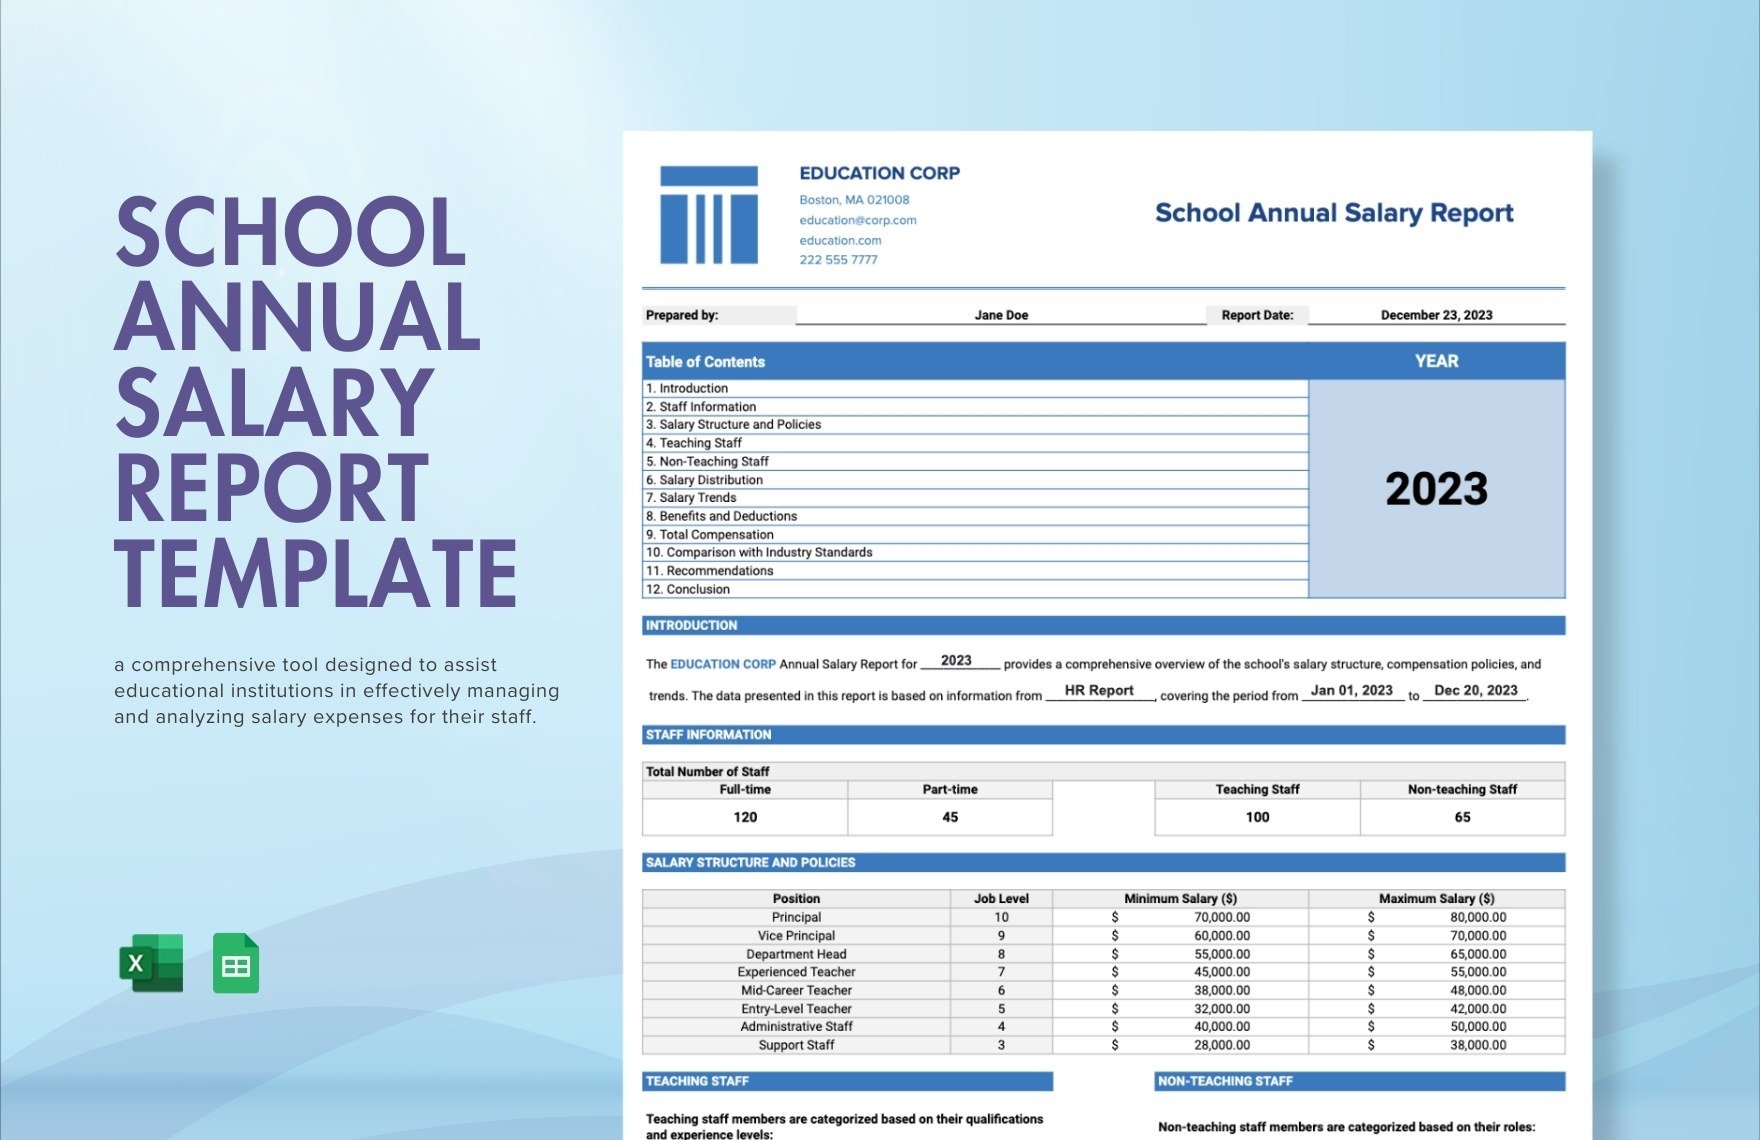 School Annual Salary Report Template in Excel, Google Sheets